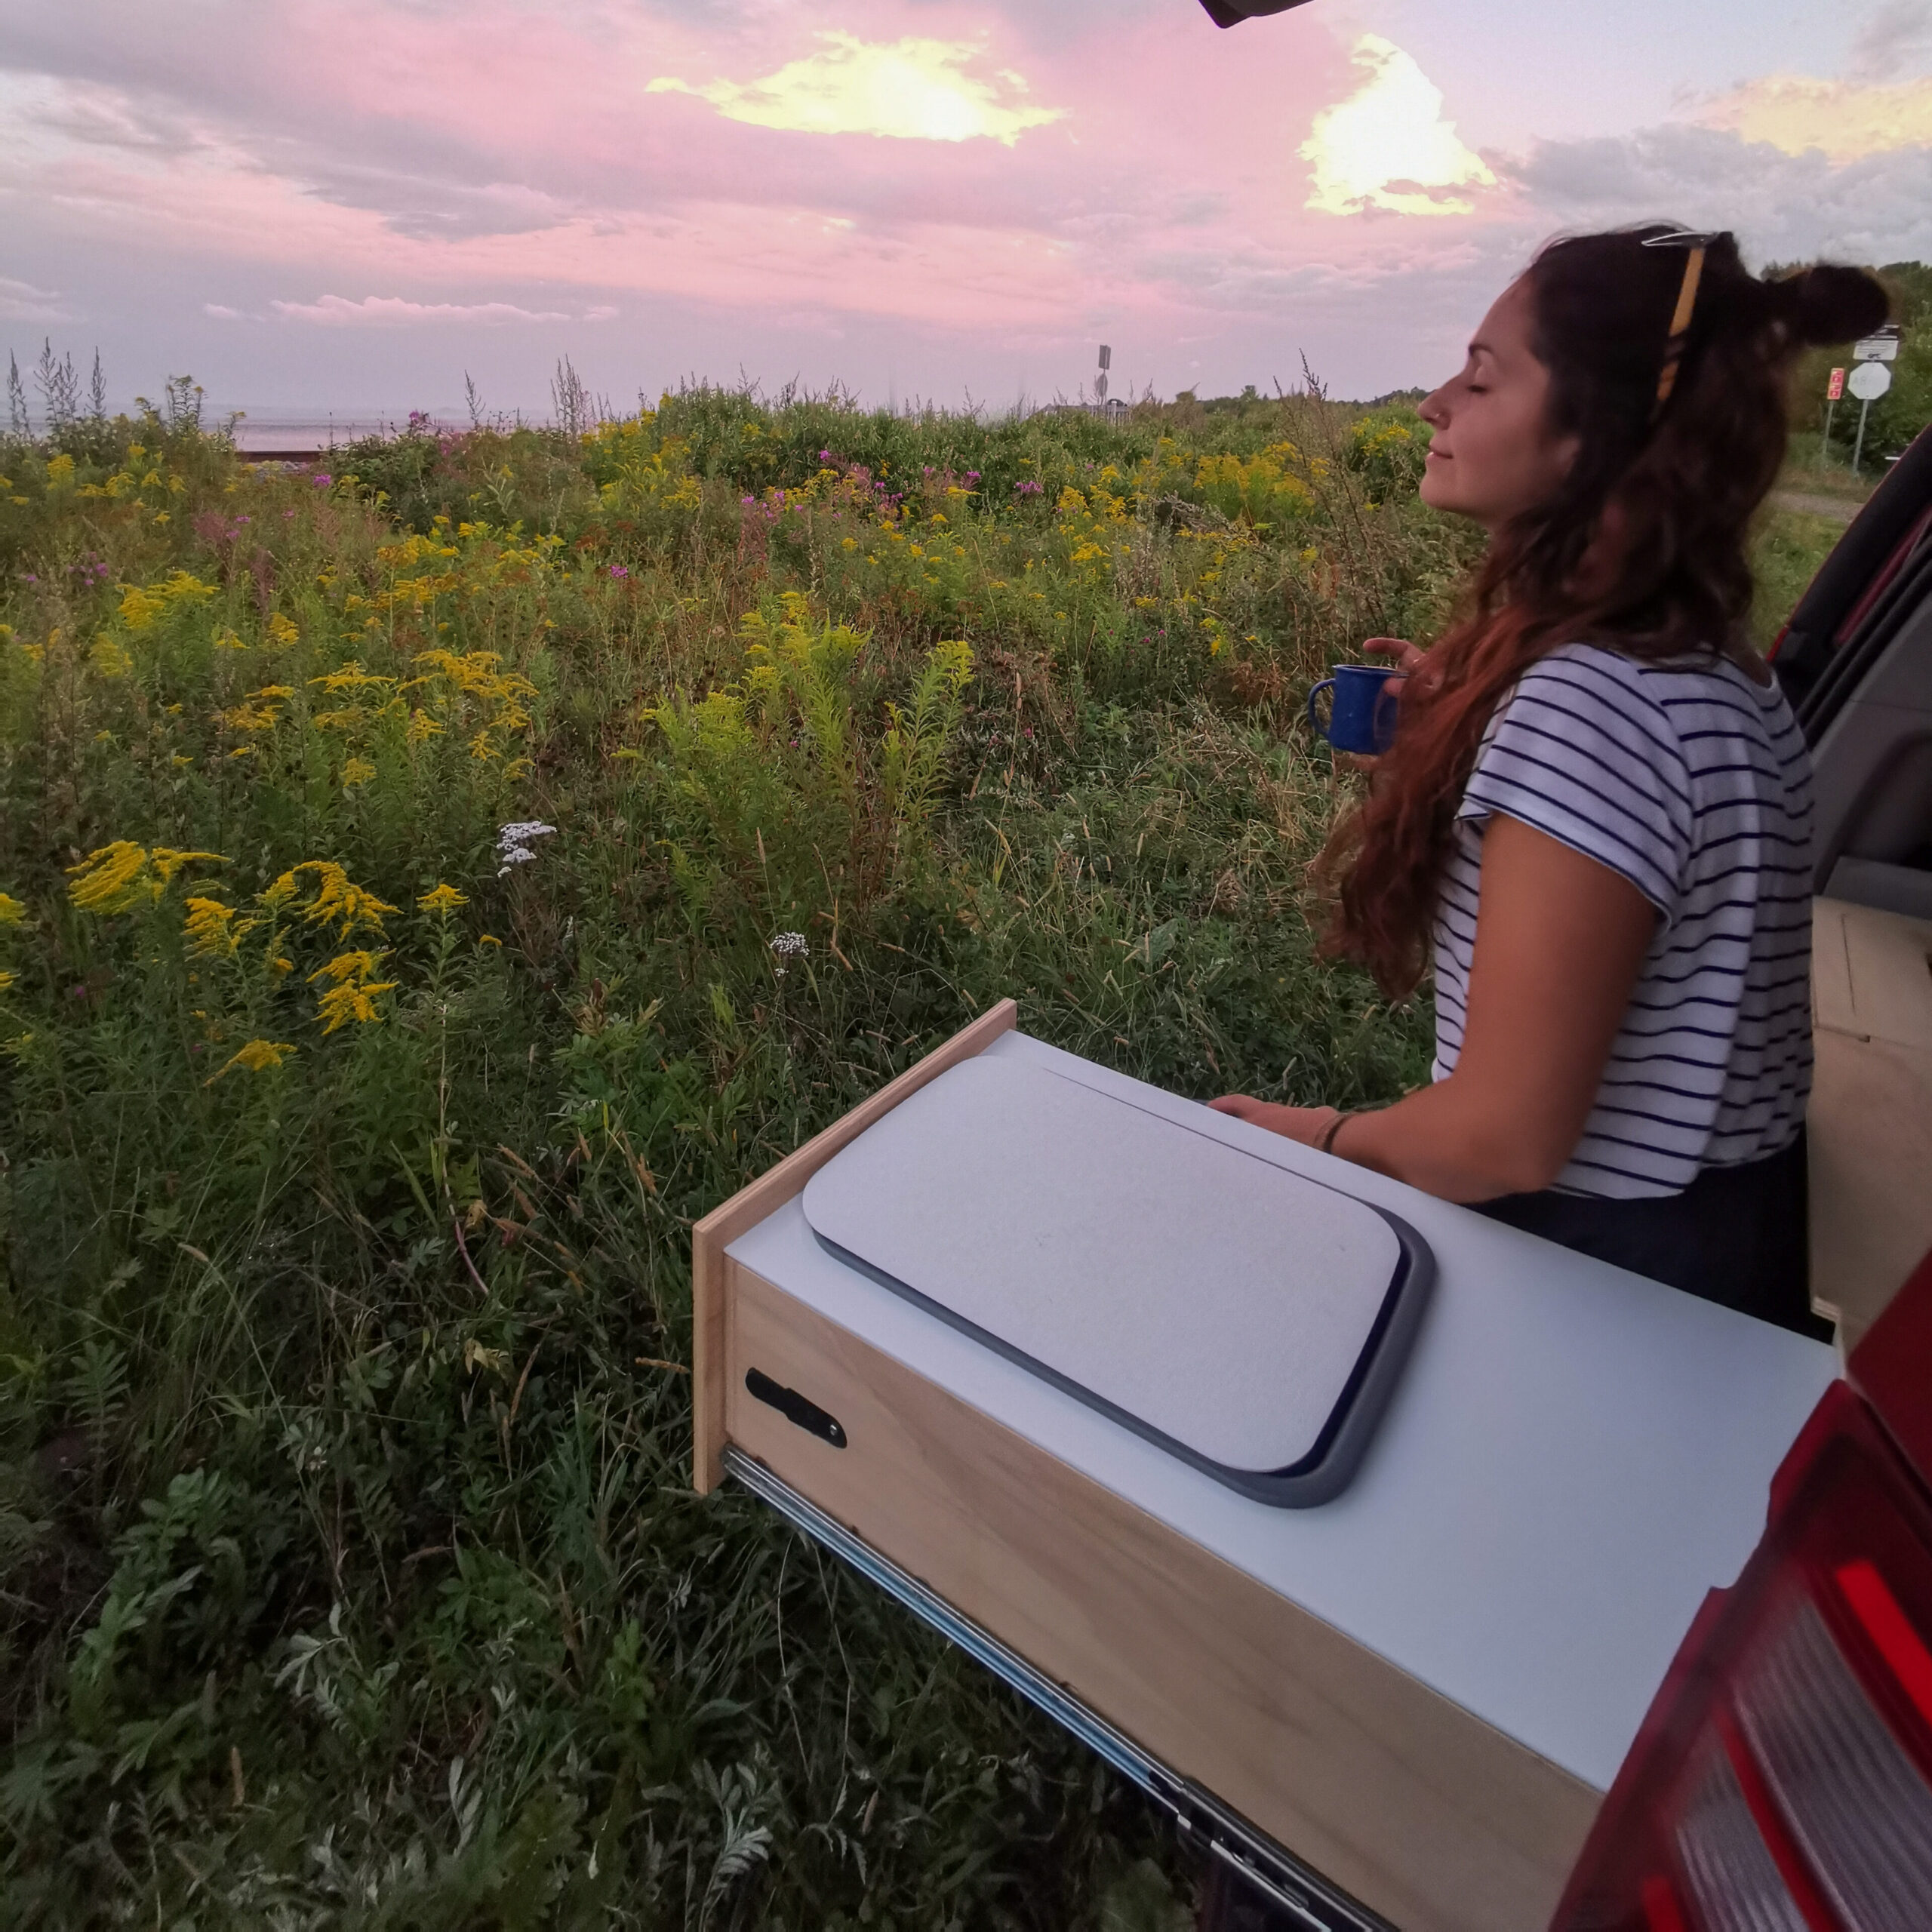 Enjoying the connexion to nature with the vanlife